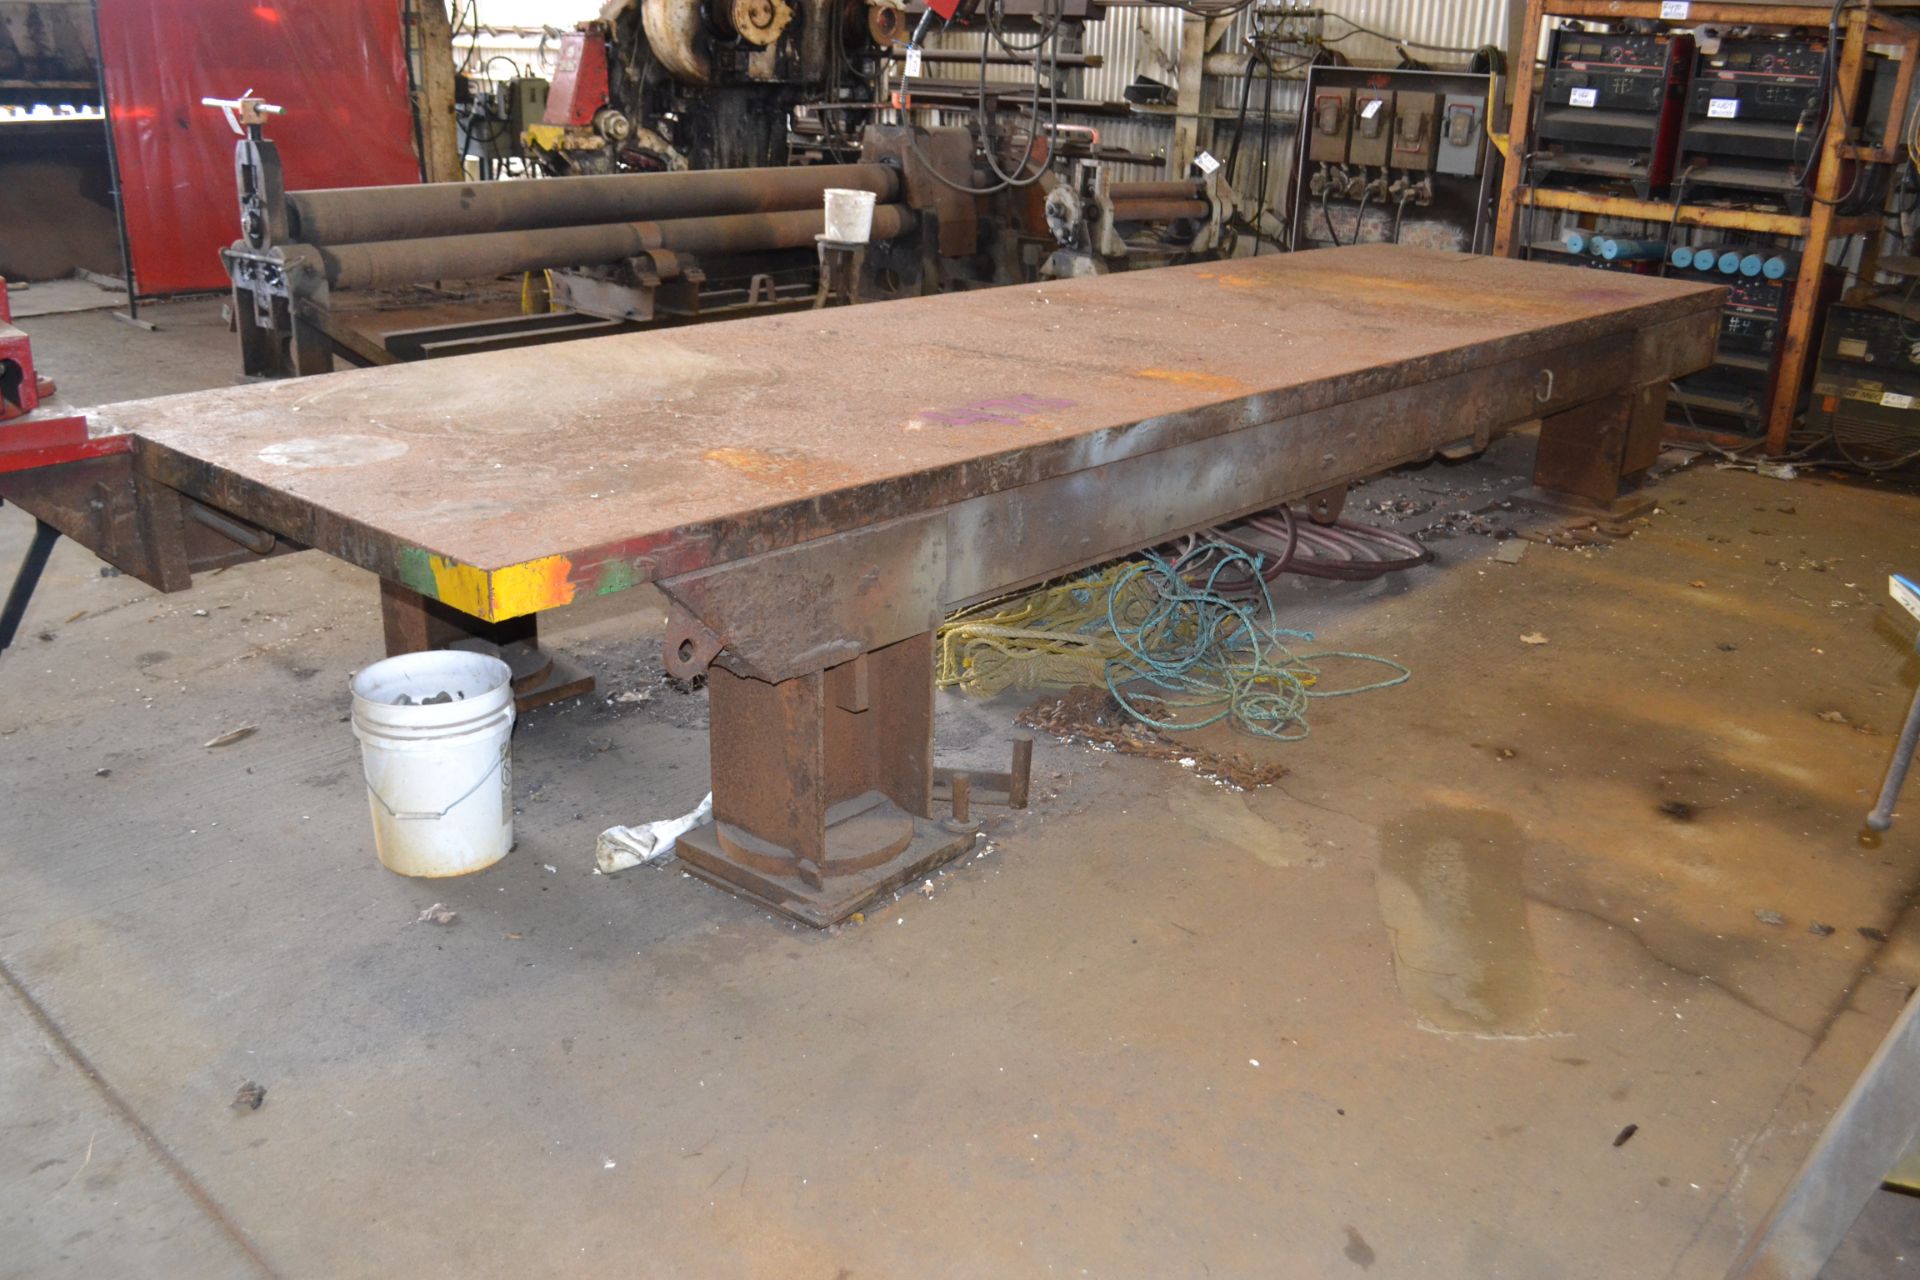 18' x 5' x 3" steel layout table